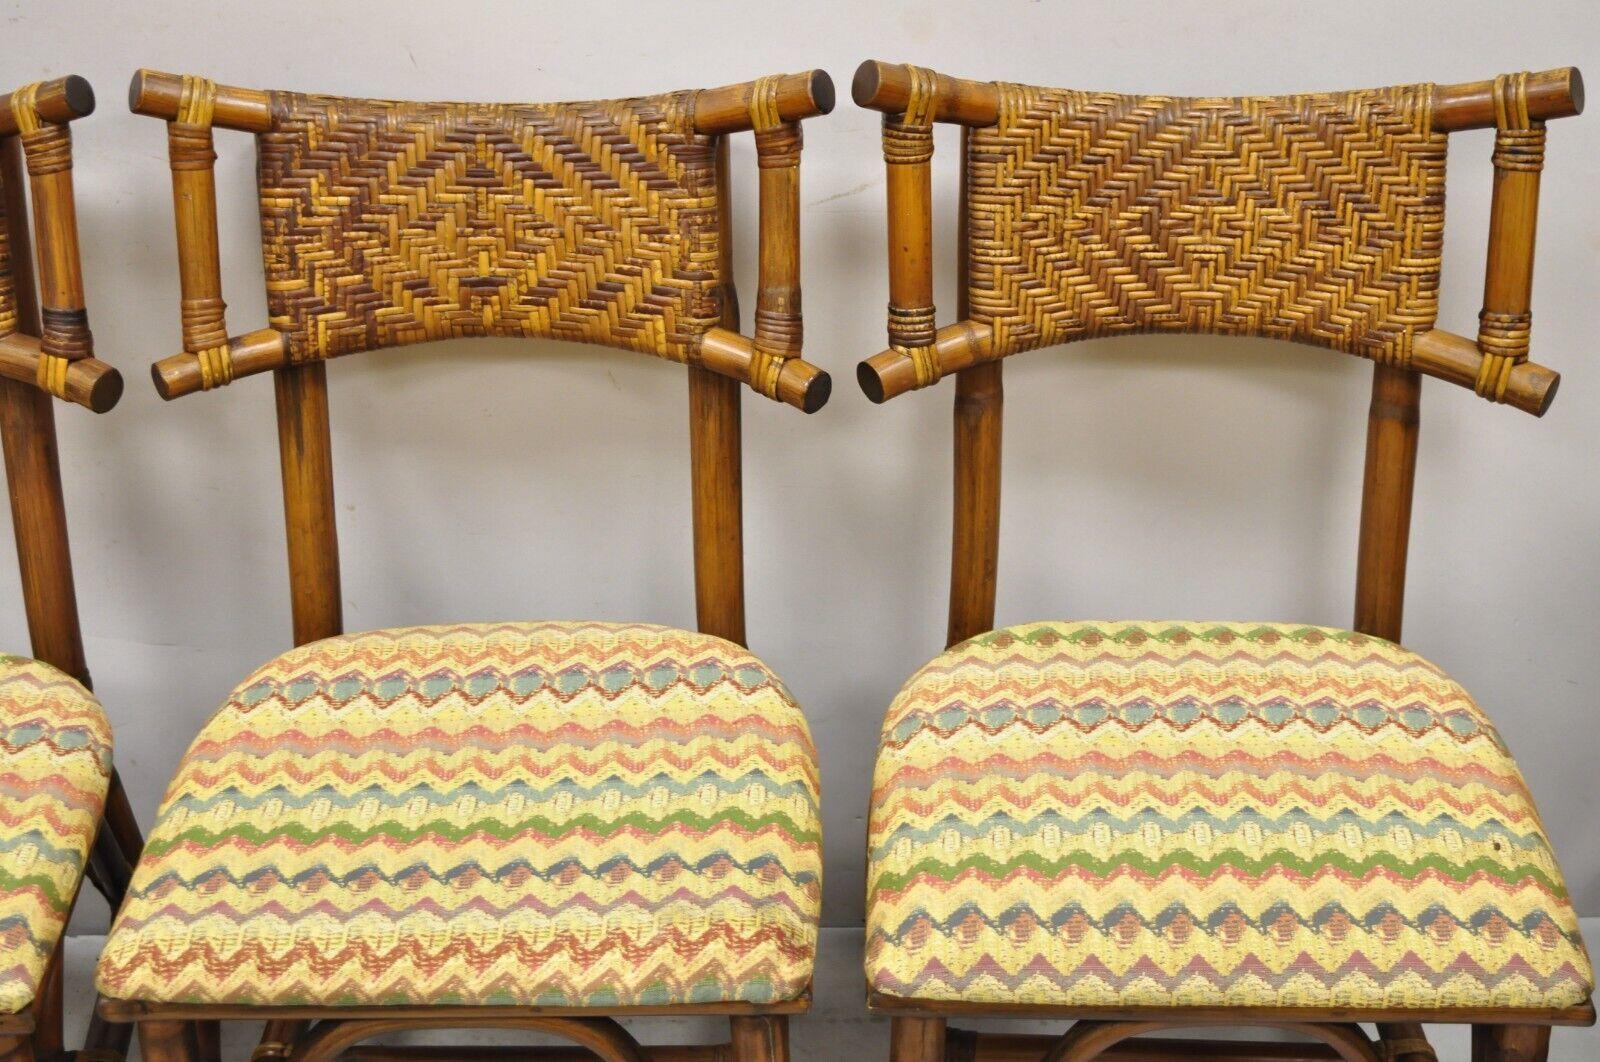 Vintage Bentwood Bamboo Rattan Tiki Hollywood Regency Dining Chairs, Set of 4 1